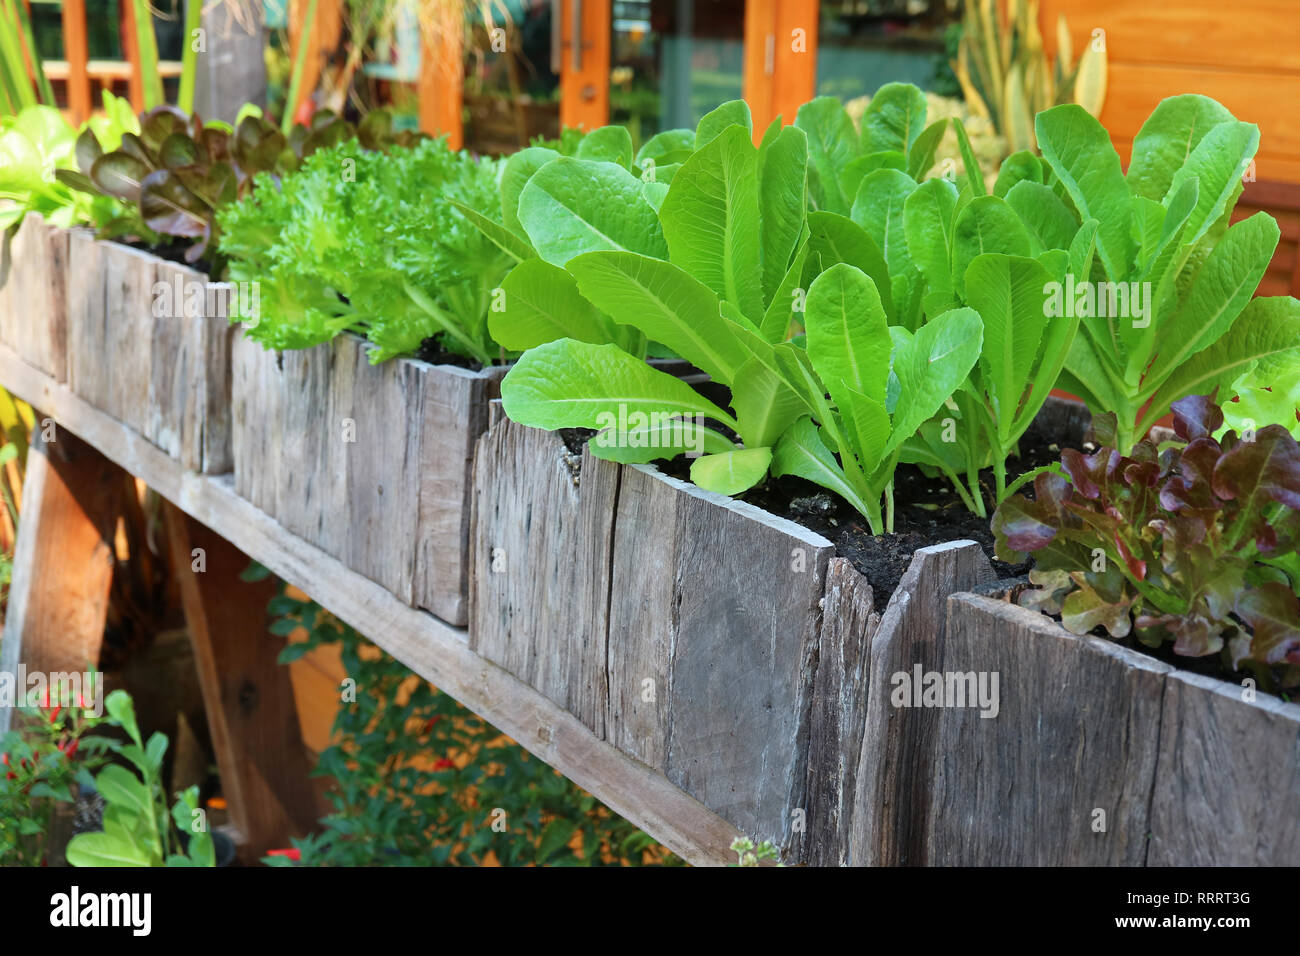 Backyard vegetable growing in the wooden containers Stock Photo - Alamy